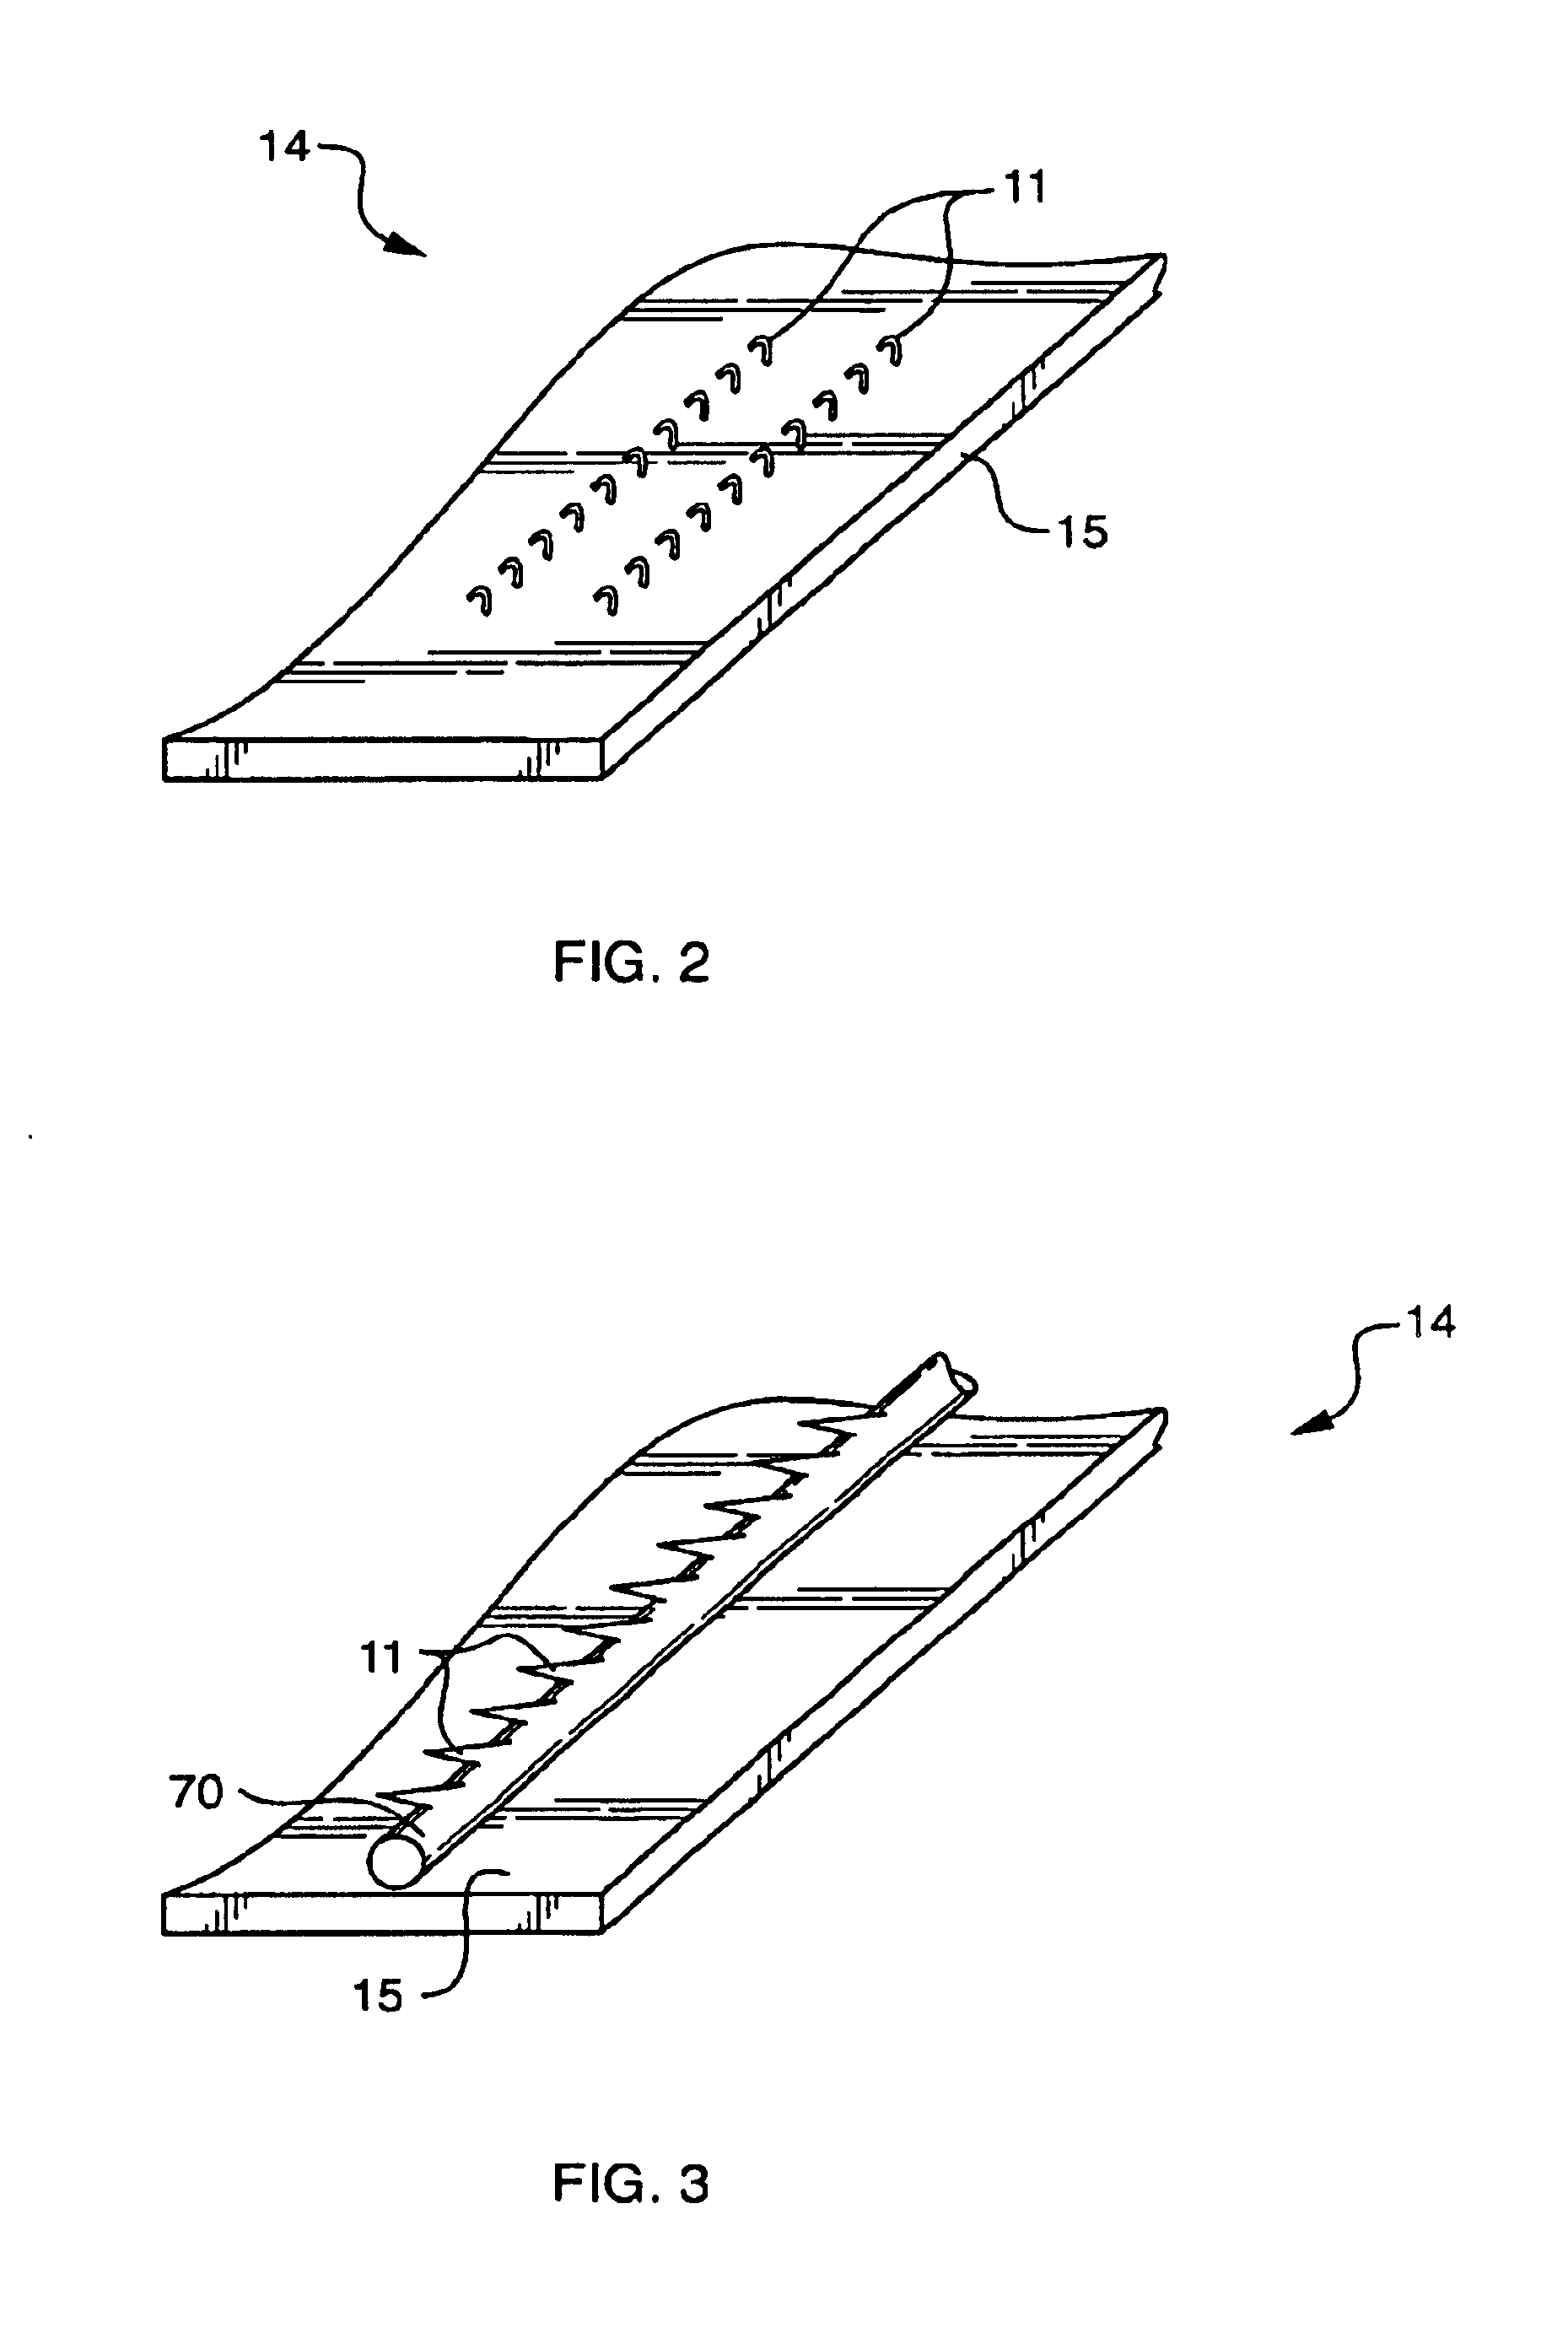 Apparatus and method for detachably securing a device to a natural heart